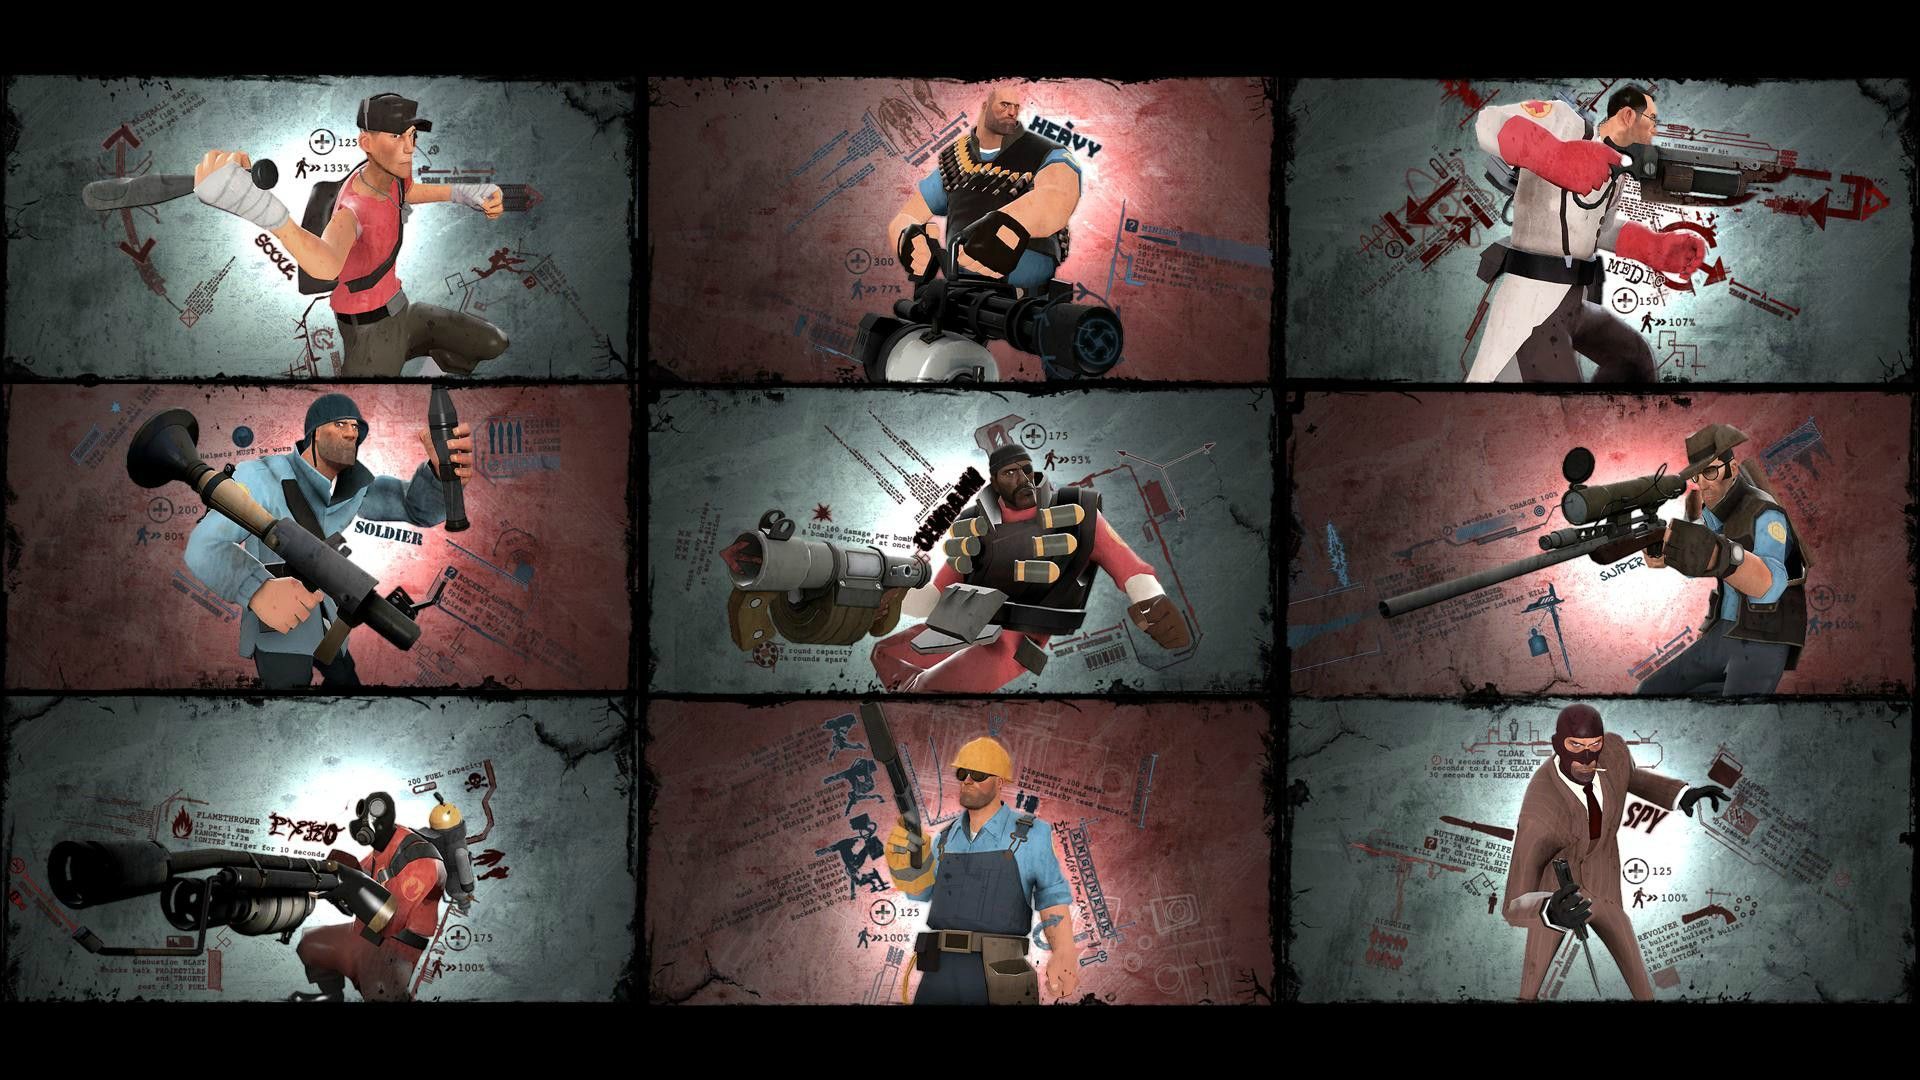 19 Cool Team Fortress 2 Wallpapers - BC GB BaconCape